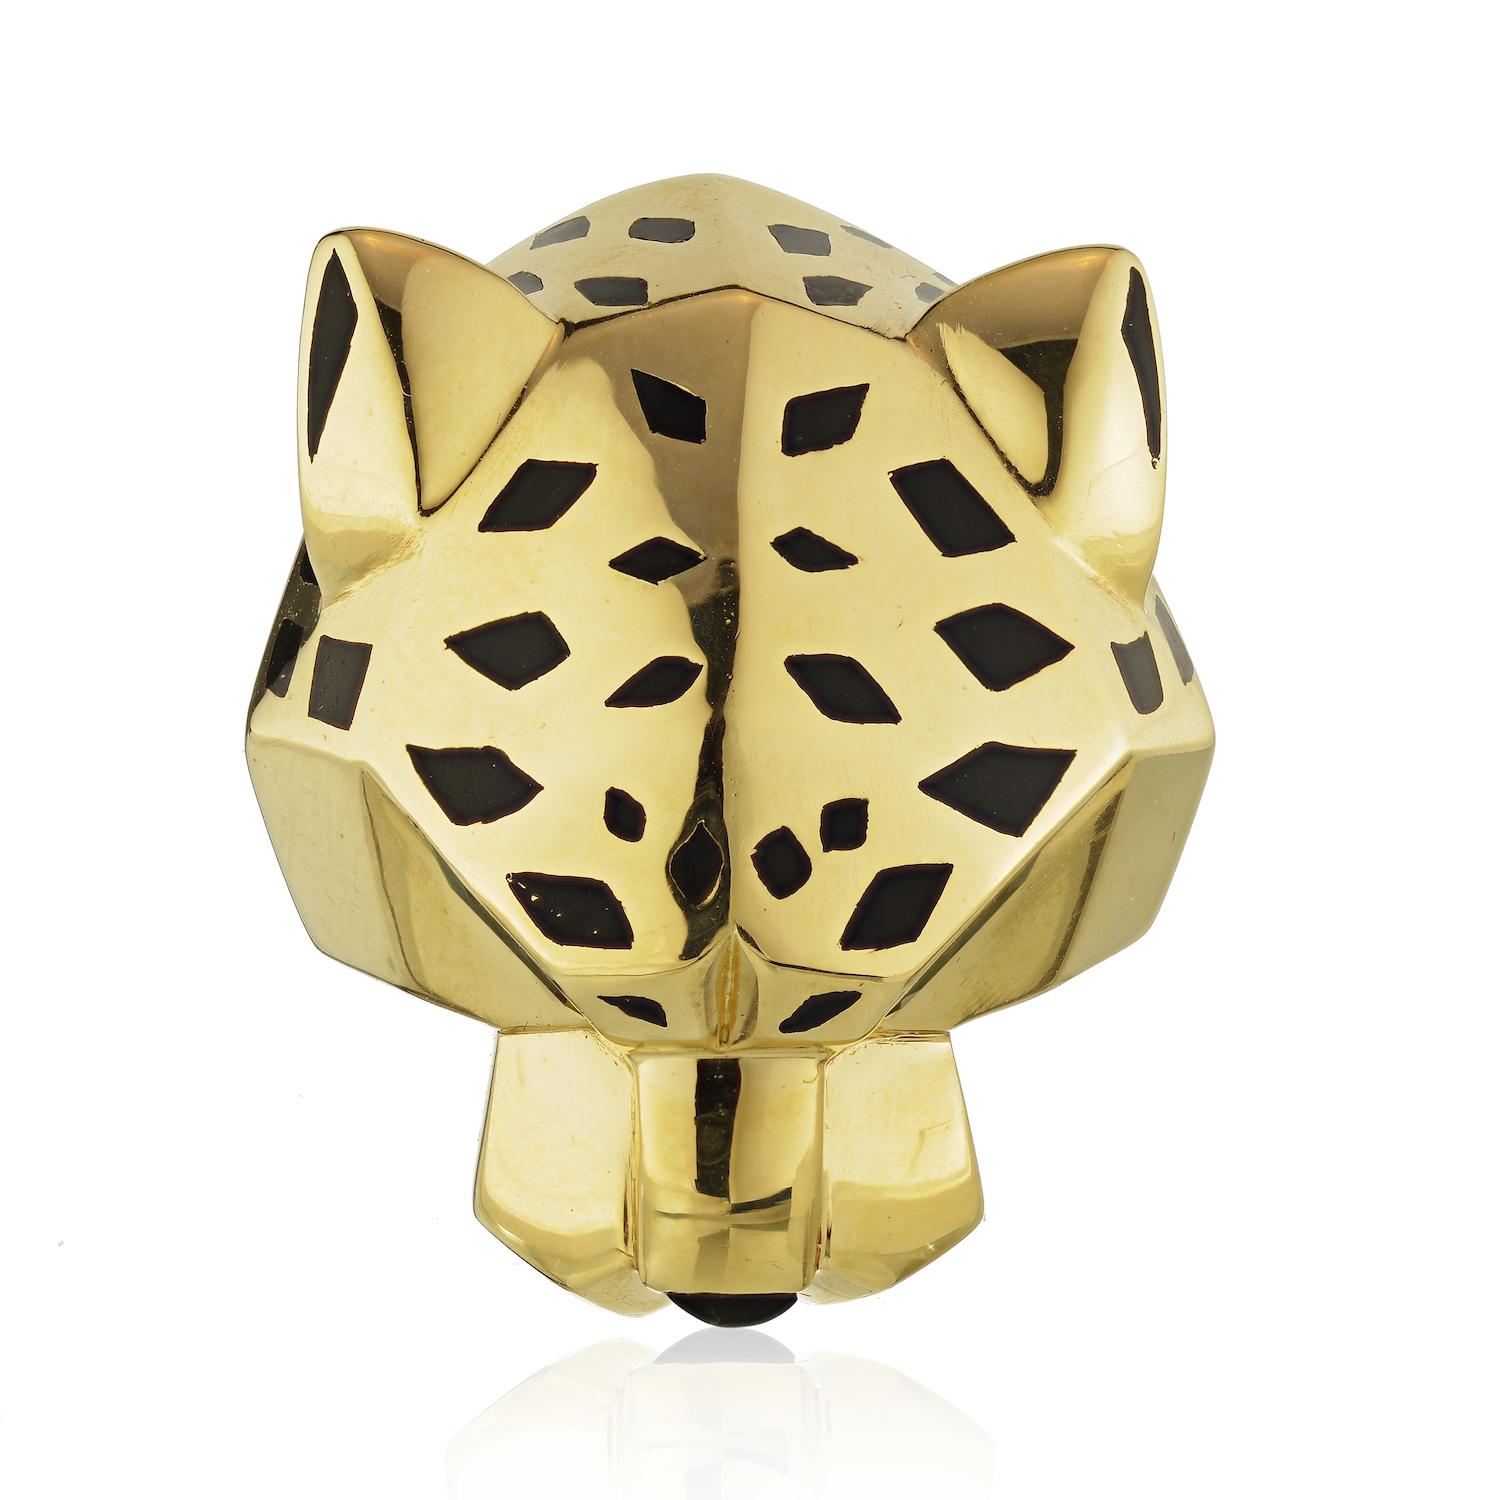 he emblematic panther has been an important part of Cartier's designs since 1914. This fiercely fashionable design from the Panthere de Cartier collection is made of 18K yellow gold and boasts an almost faceted look. The ring is covered with black